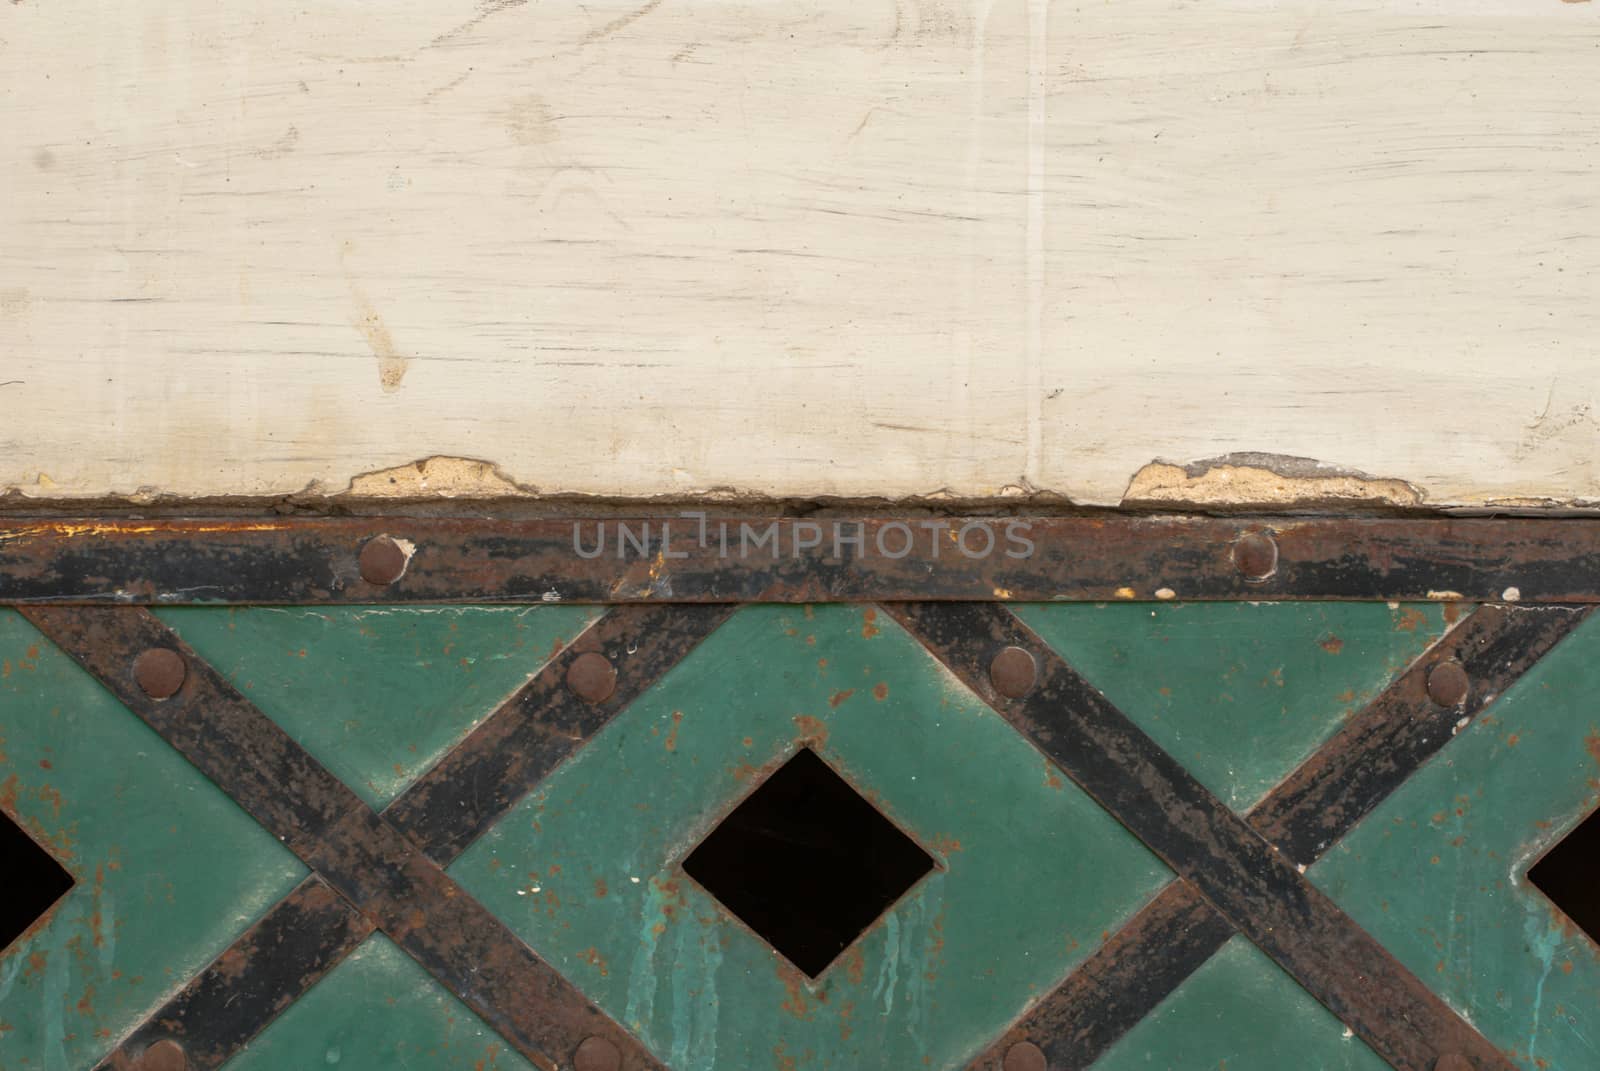 fragment of an iron surface is covered with green color paint, which has long been under the influence of different climatic conditions